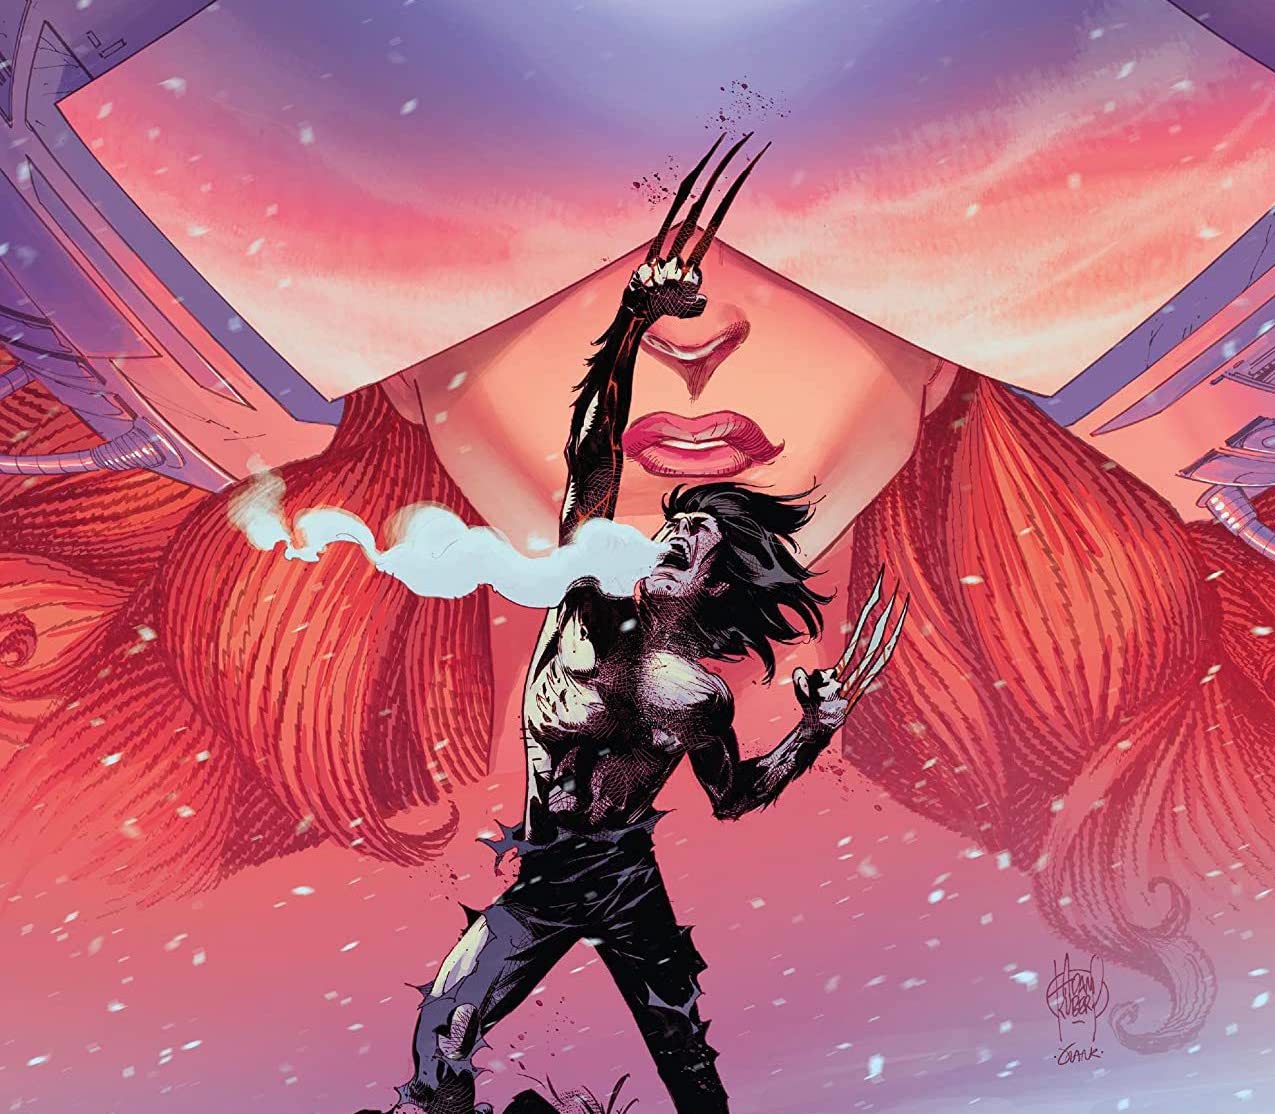 'X Lives of Wolverine' #2 is a pulse-pounding action-adventure ride